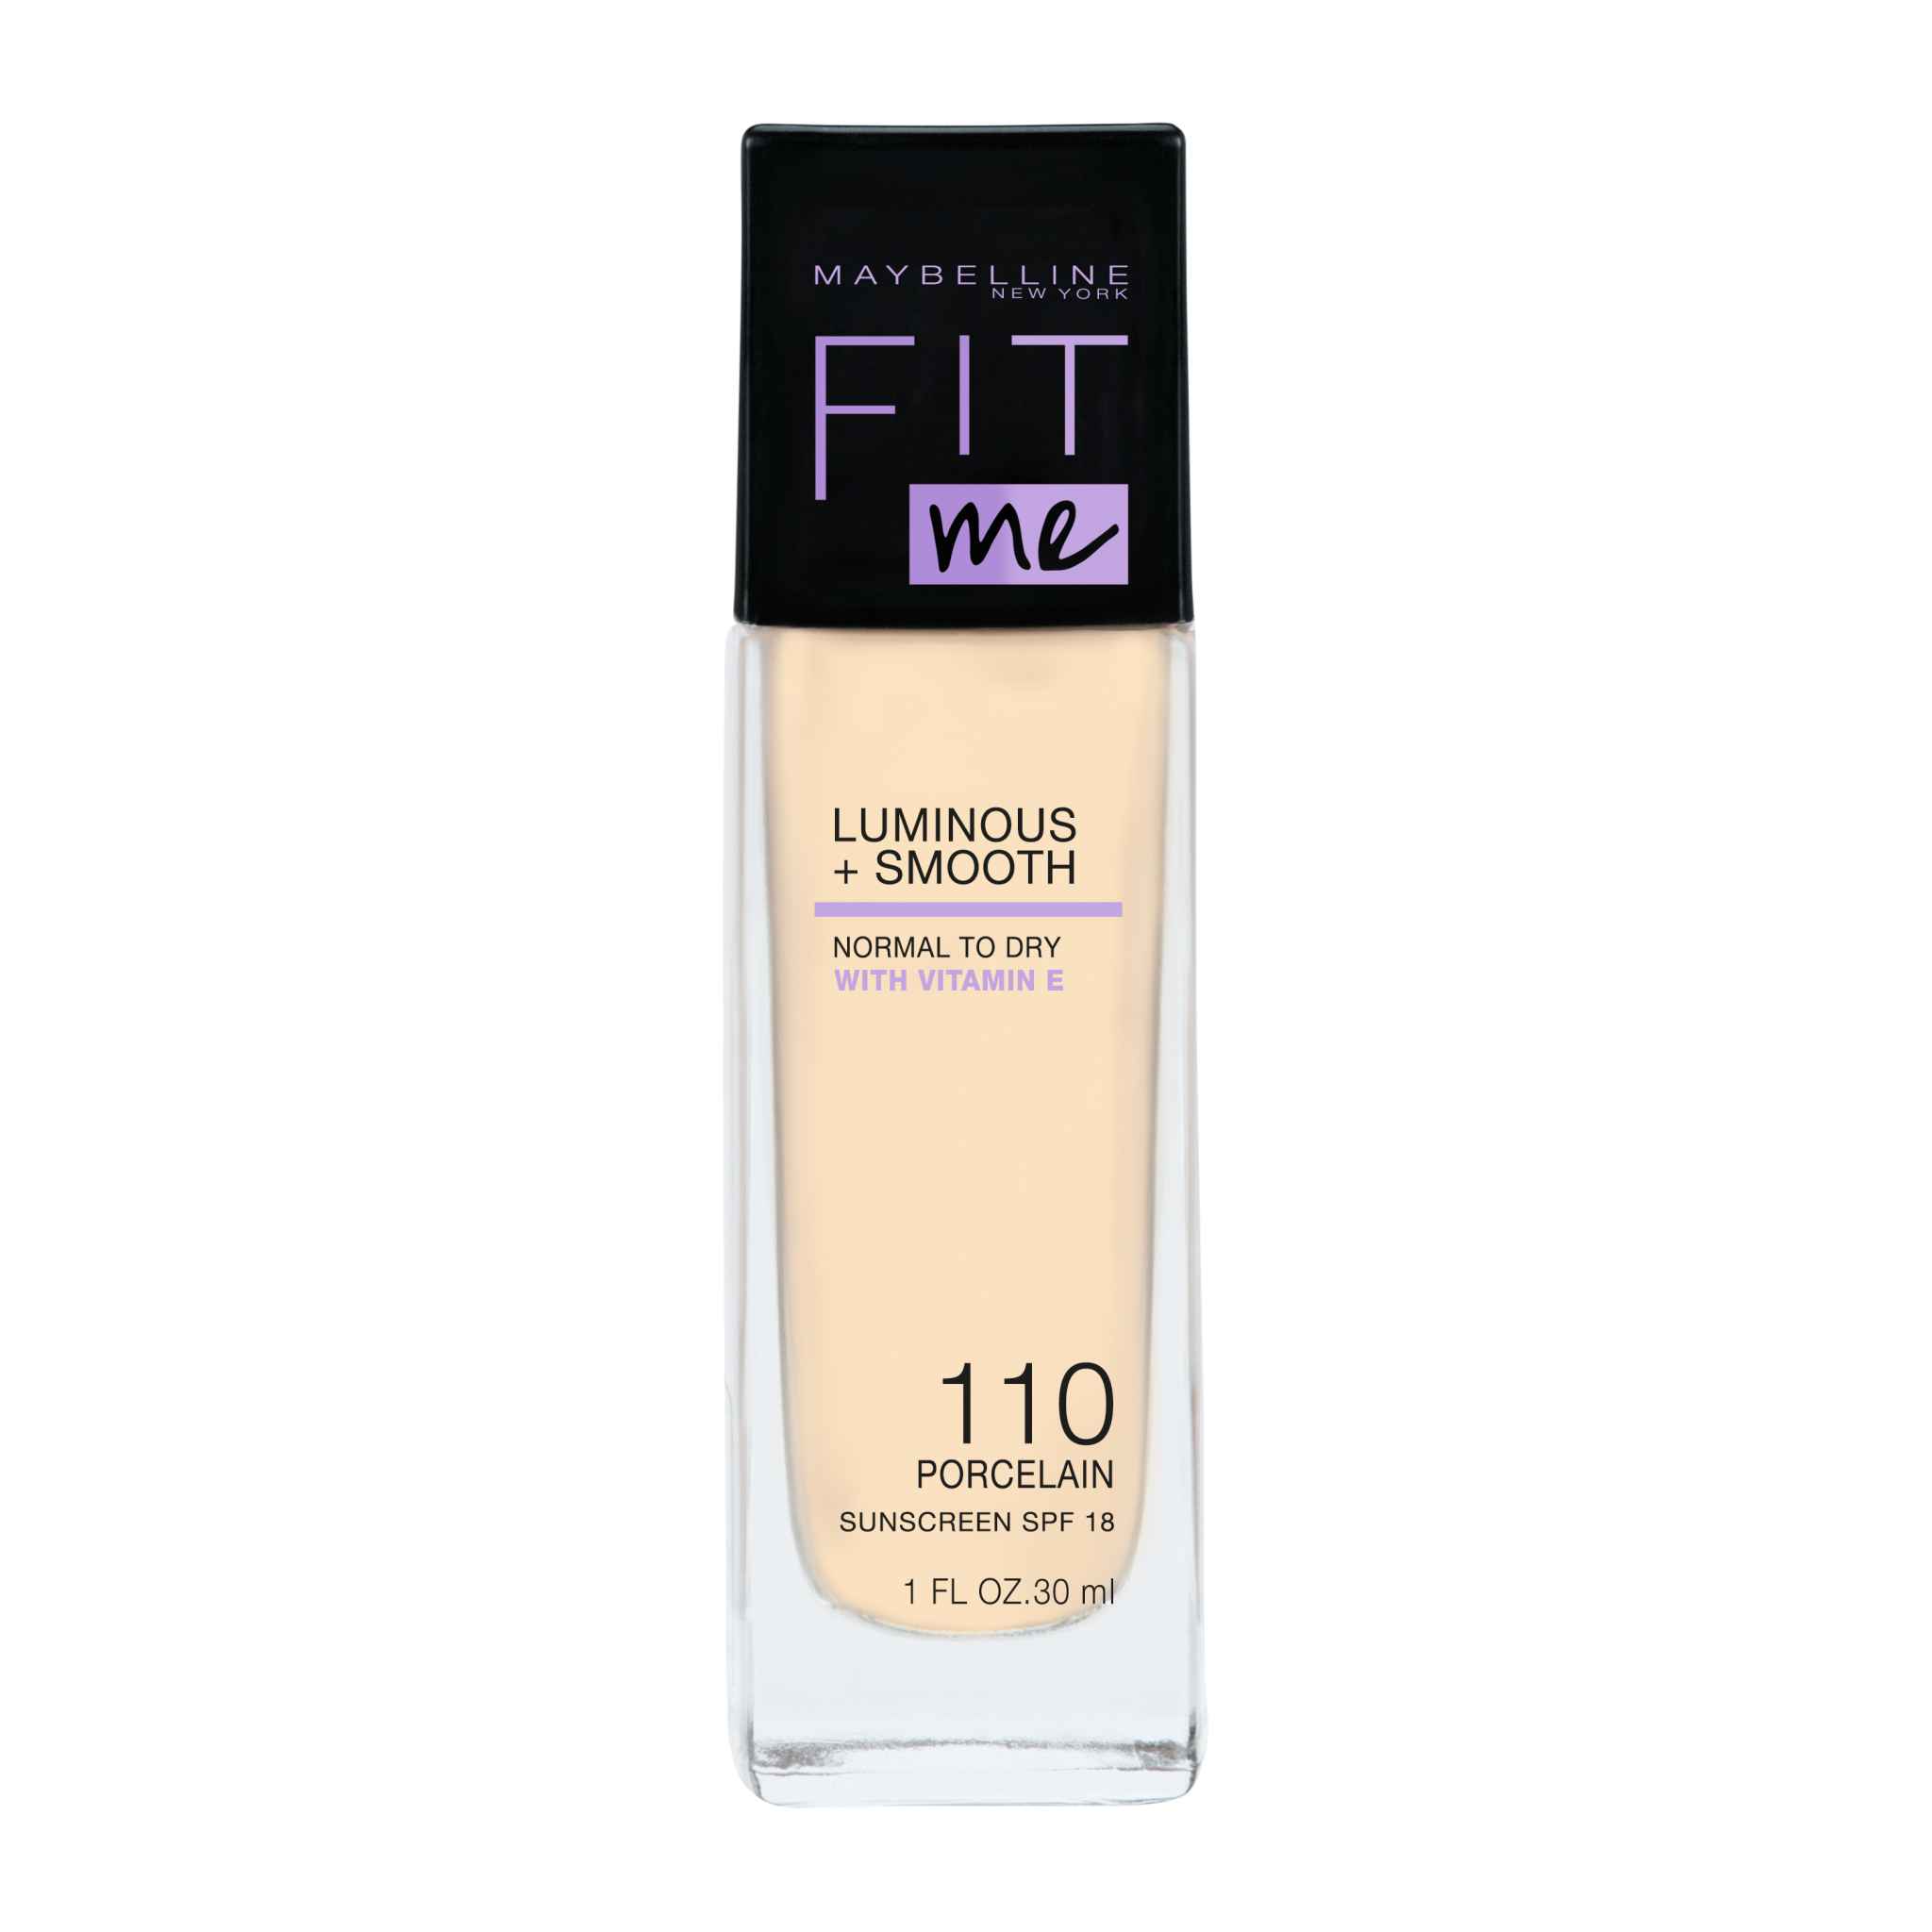 Maybelline New York Fit me Luminous  Smooth 110 Porcelain make-up